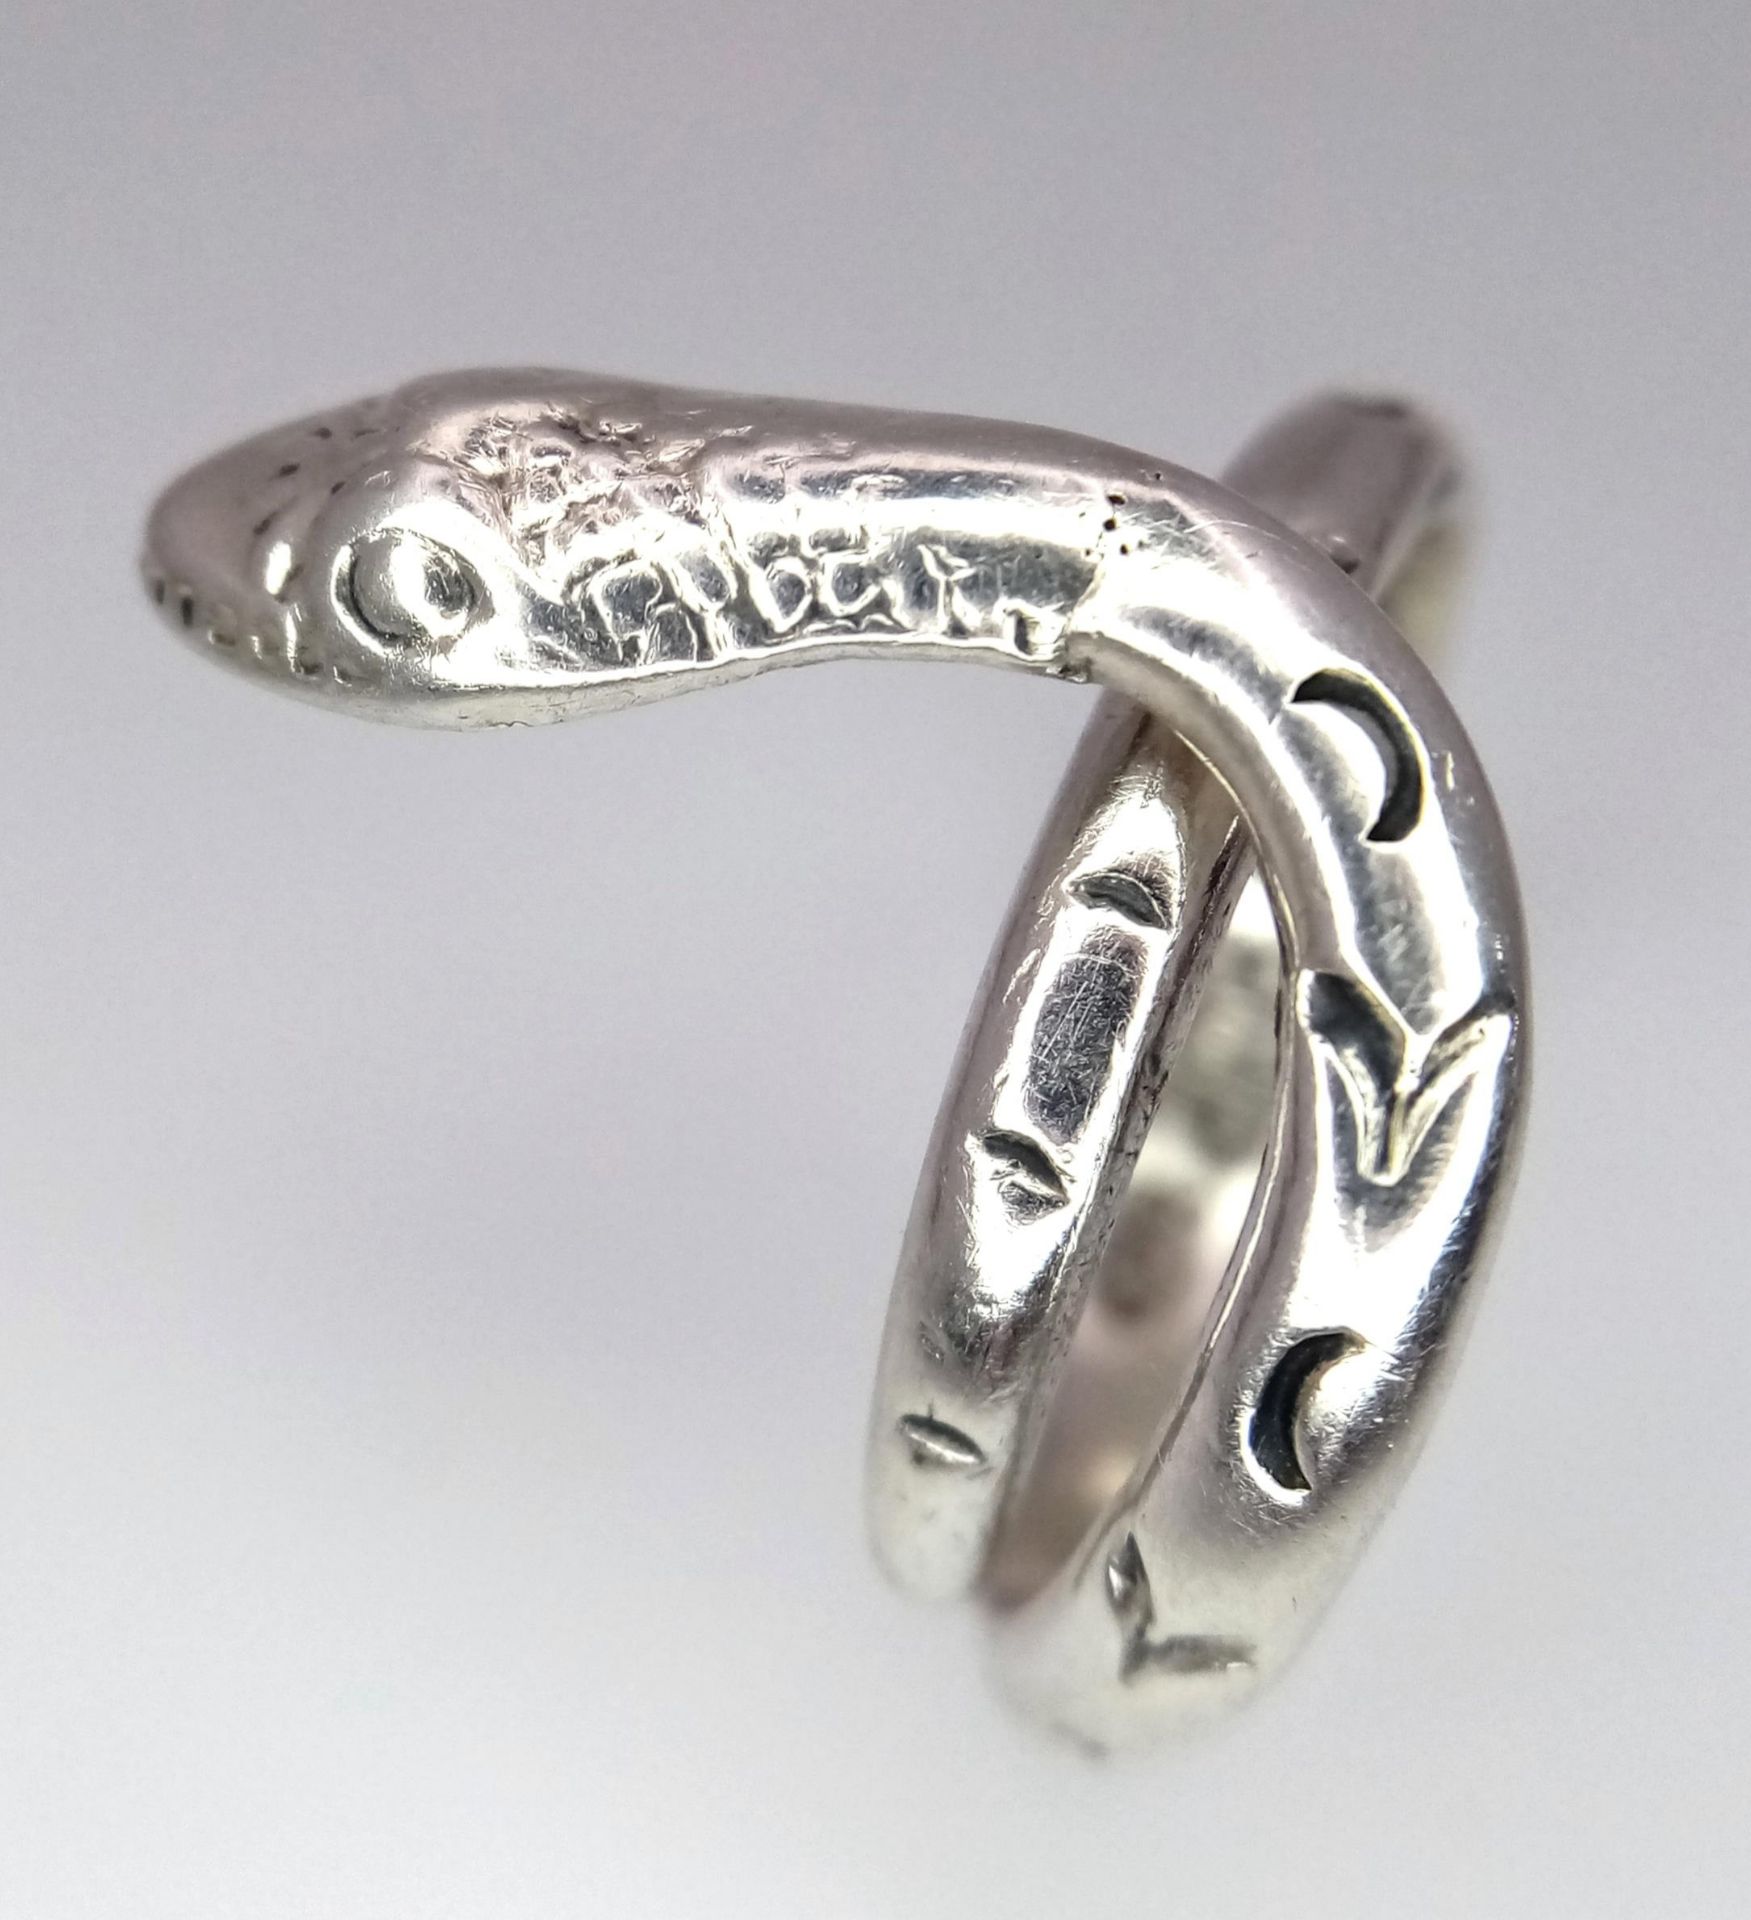 A Vintage Mexican Sterling Silver Snake Design Ring Size T. 5.13 Grams. - Image 4 of 5